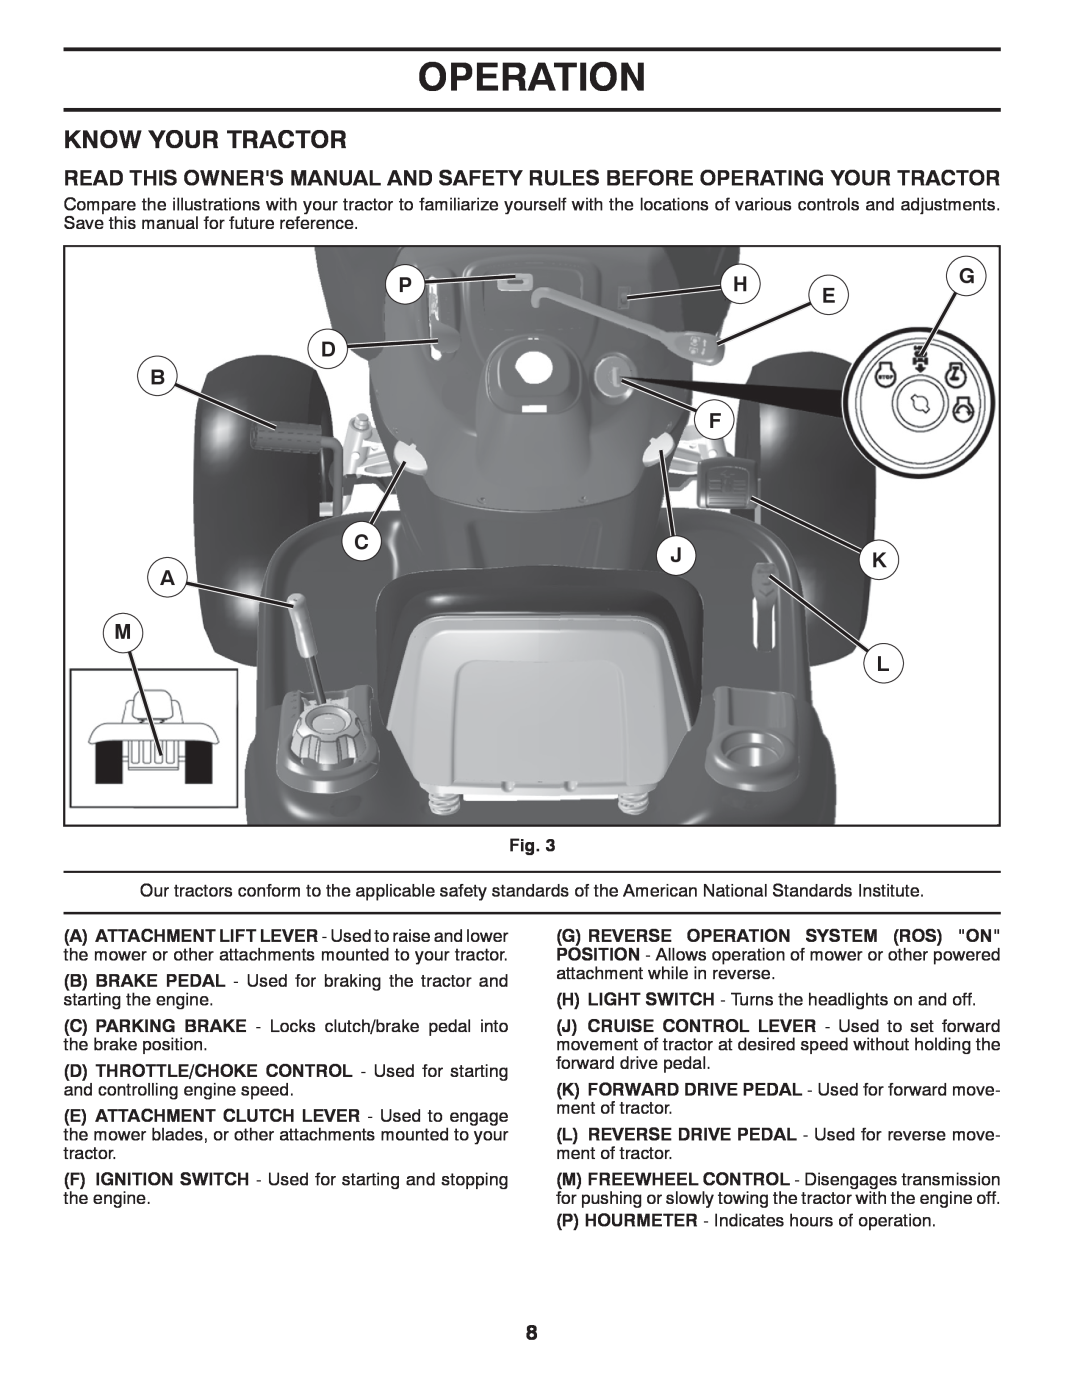 Poulan 532 43 85-70, 96042012500 manual Know Your Tractor, Ph Eg D, B A M, Cjk L, Operation 